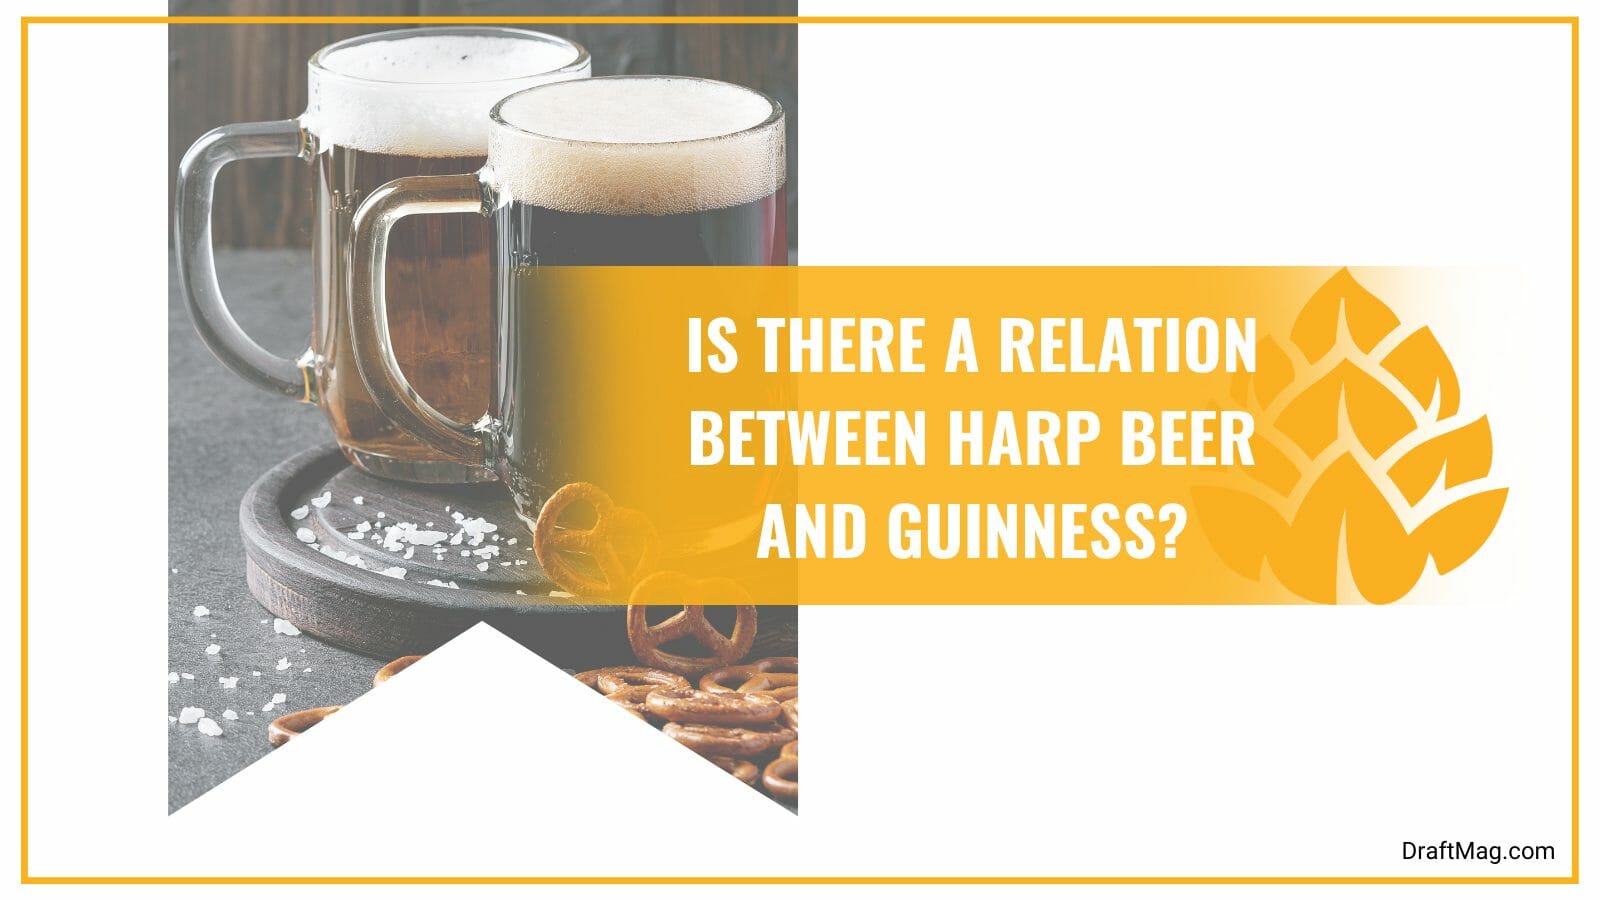 Guinness and harp beer are related